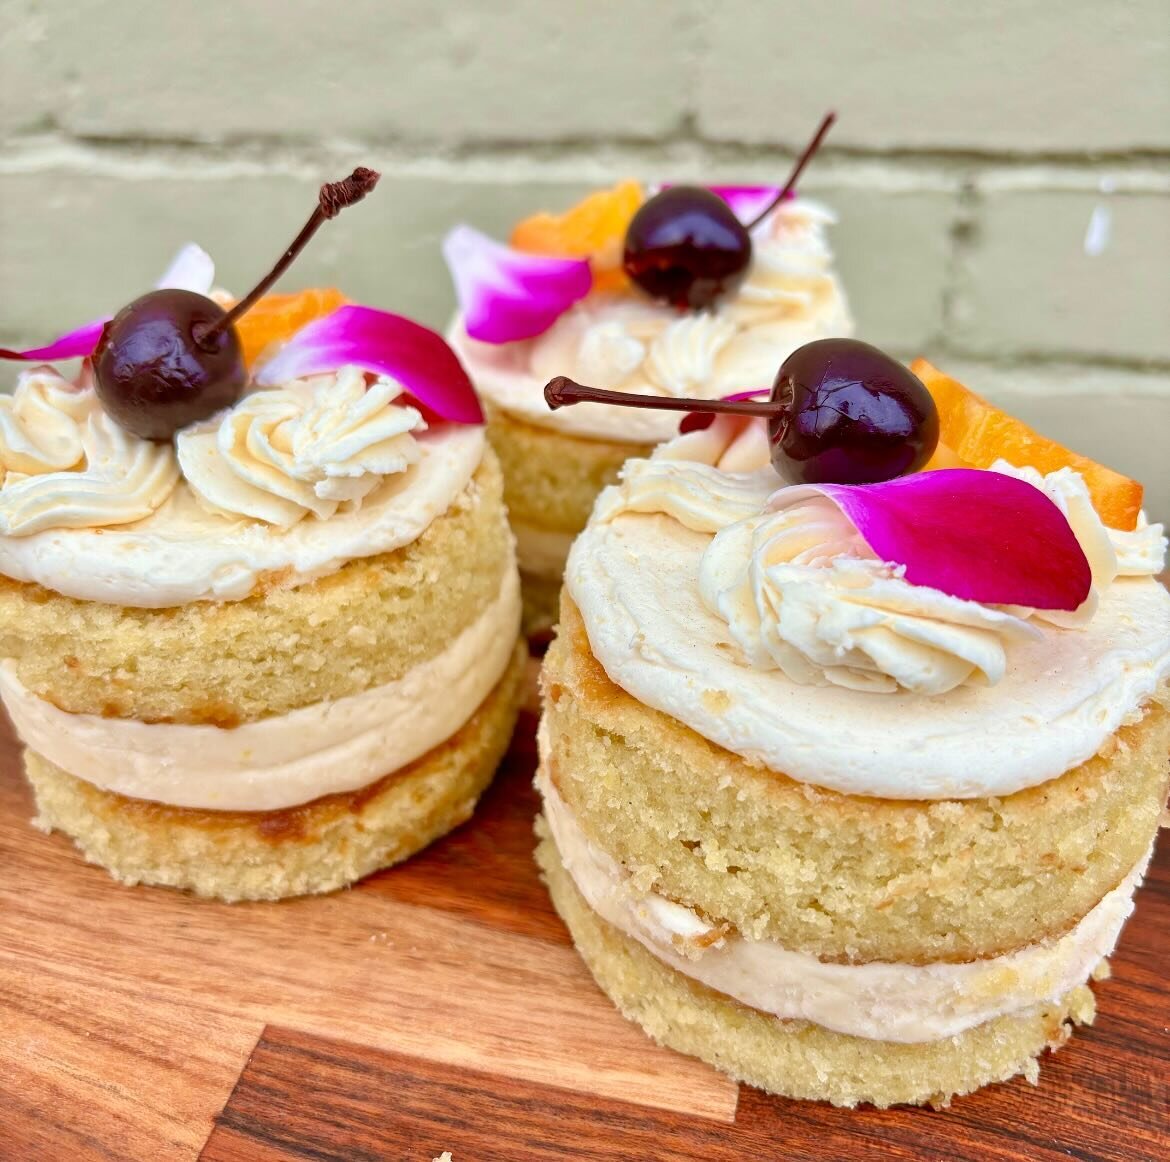 Want a cake but don&rsquo;t have enough people to share it with? Introducing&hellip;.Baby Cakes! Perfect for 1-2 people. And available Friday to Sunday!

This weekend, we are featuring our seasonal flavor which is citrus olive oil cake and with citru